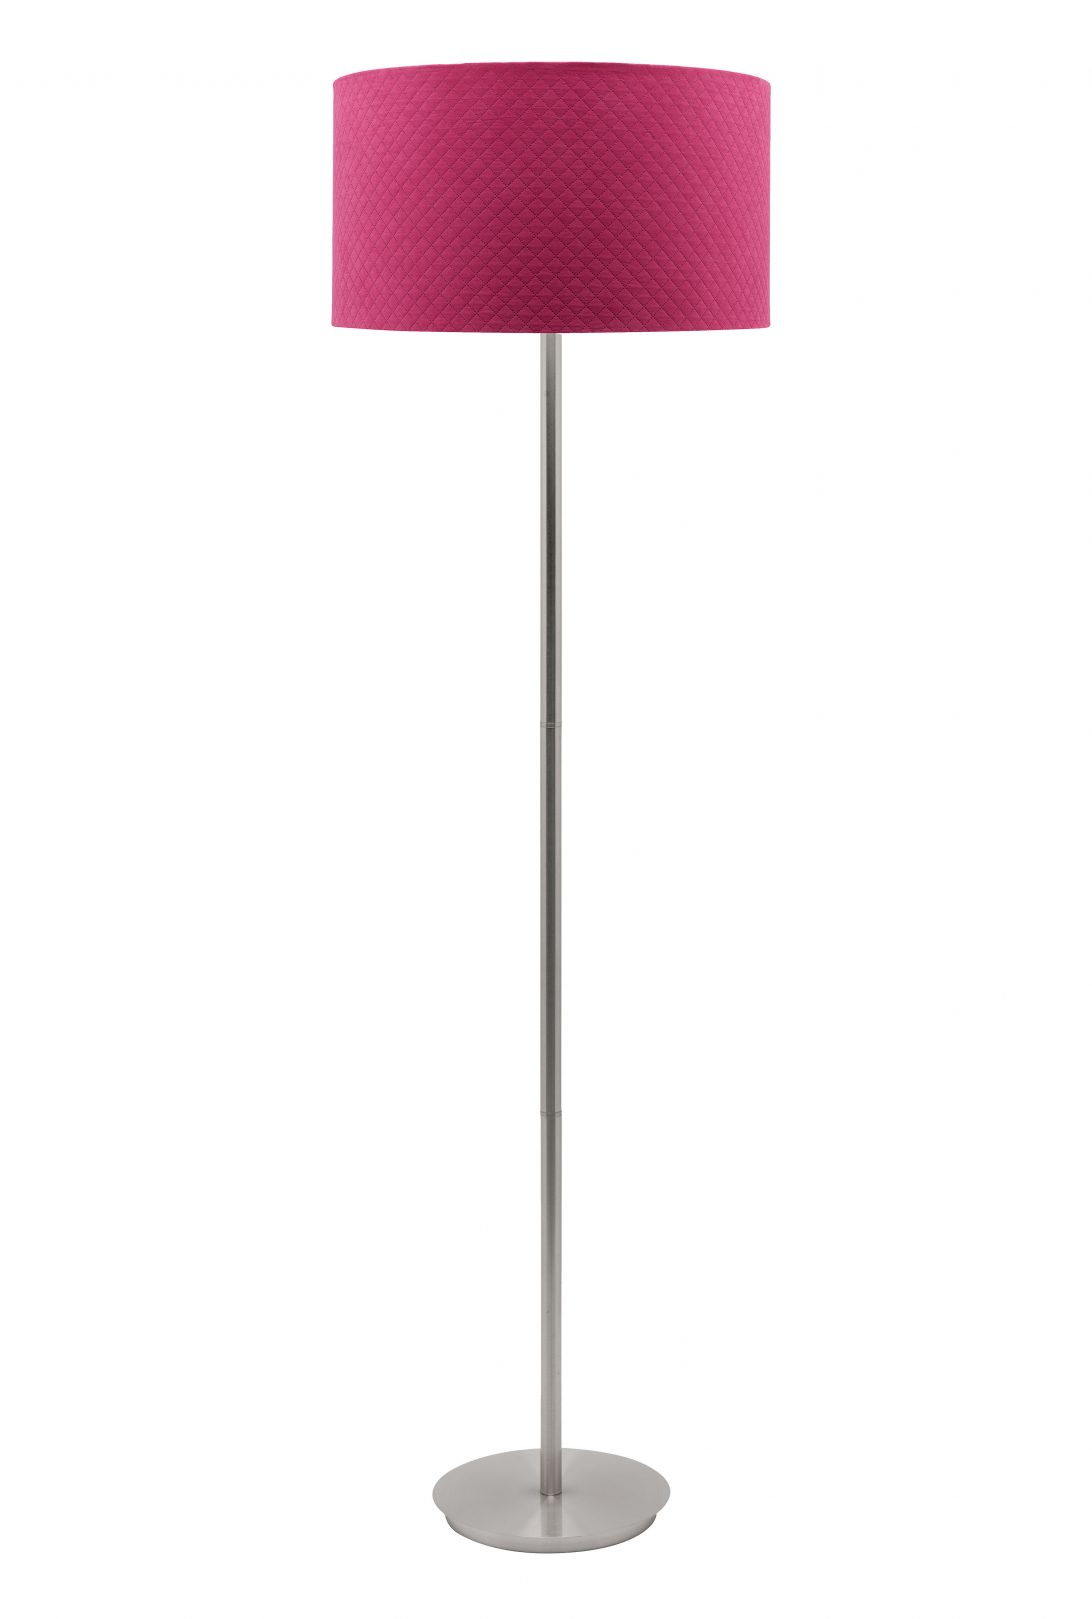 Target Room Essentials Floor Lamp Kids Blush Pink Lamps within size 1092 X 1619